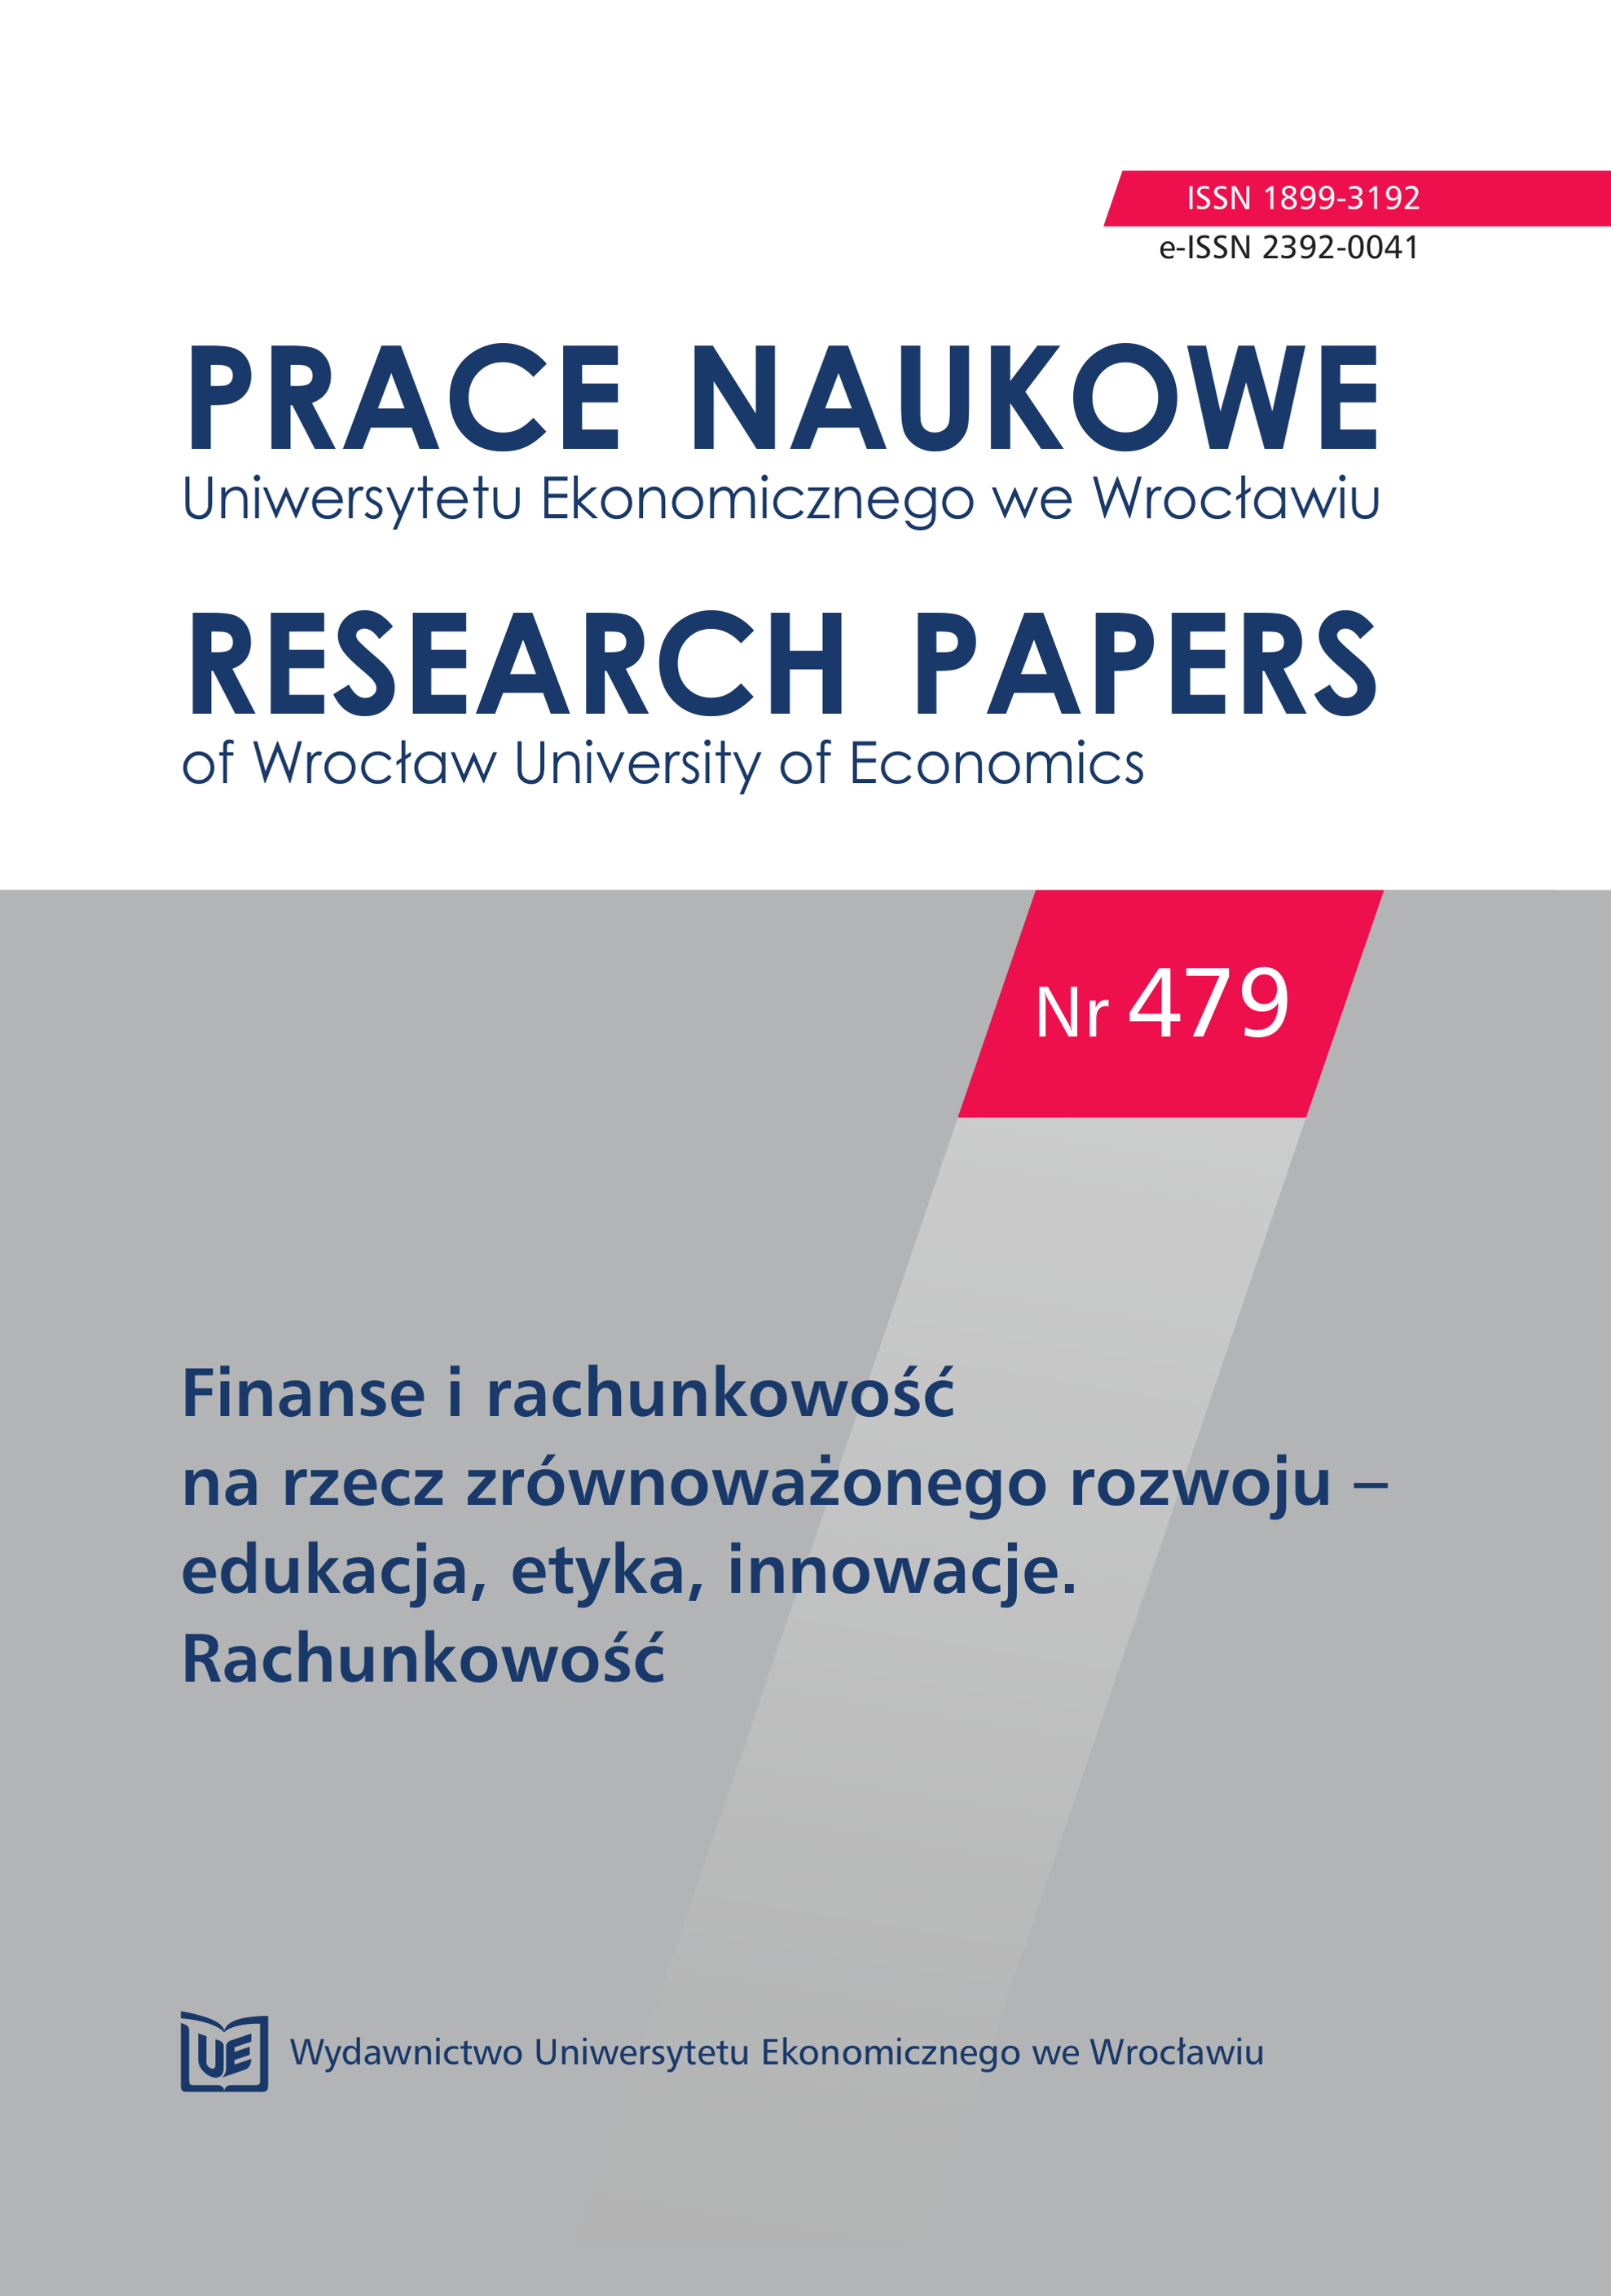 Practice for making reports publically available by foundations in Poland – case study of commercial banks foundations